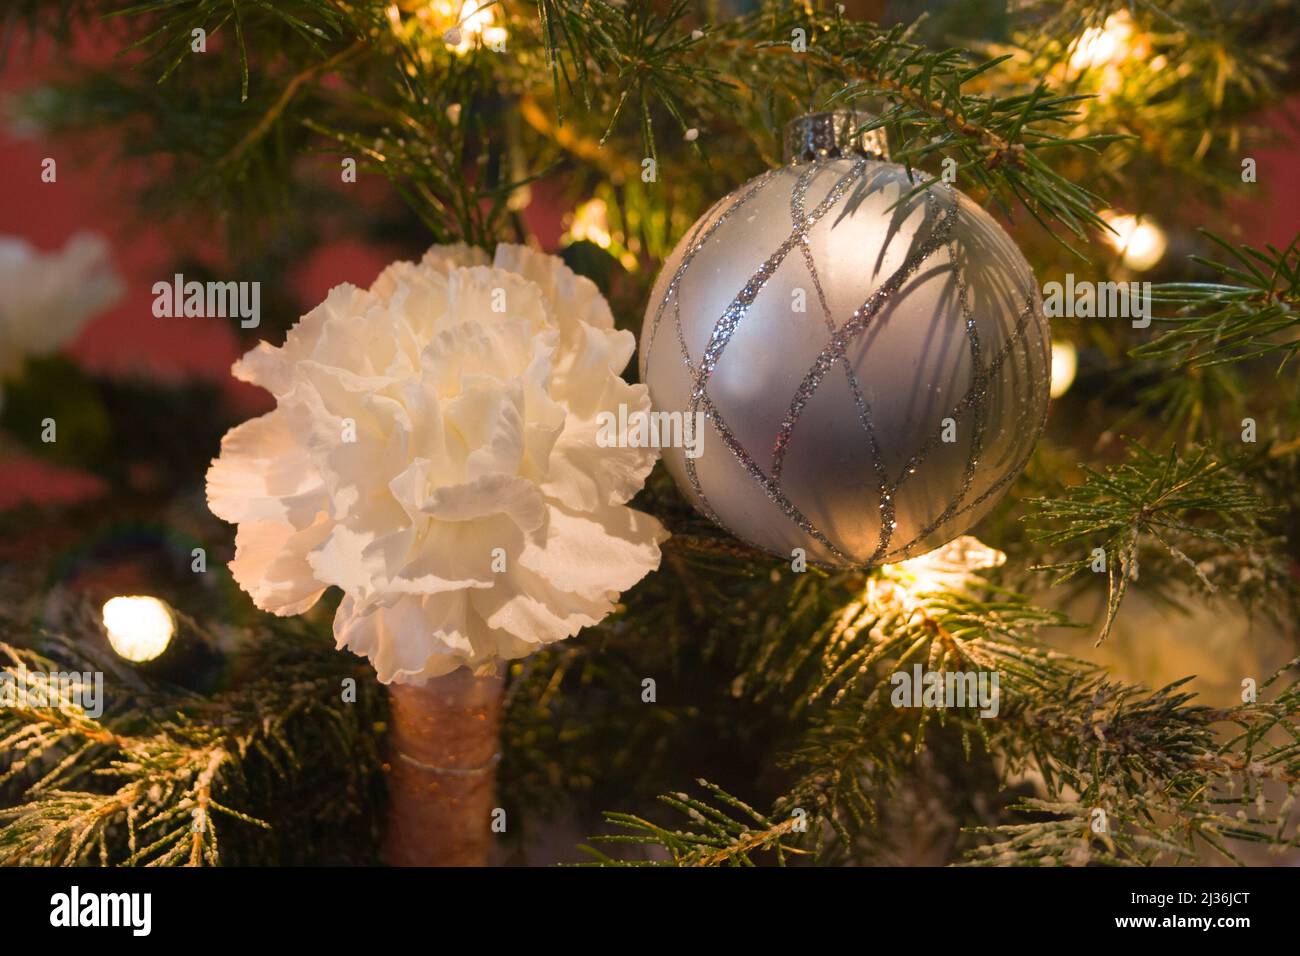 Christmas decoration on a tree with bauble, flower and fairy lights. Stock Photo